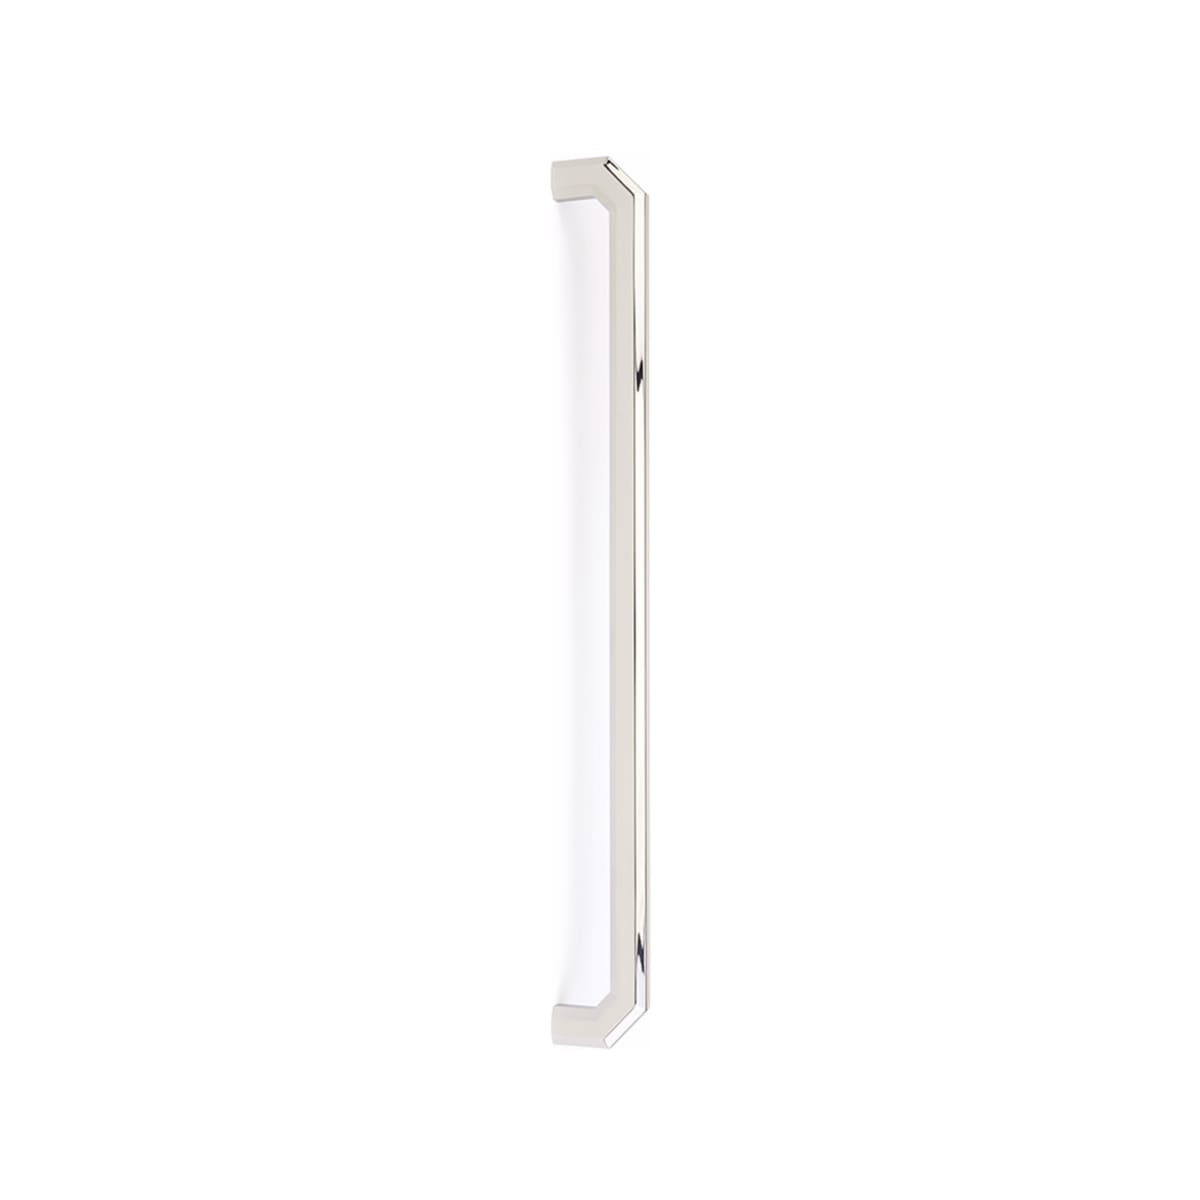 86622US14 - Riviera - Appliance Pull 18" - Polished Nickel